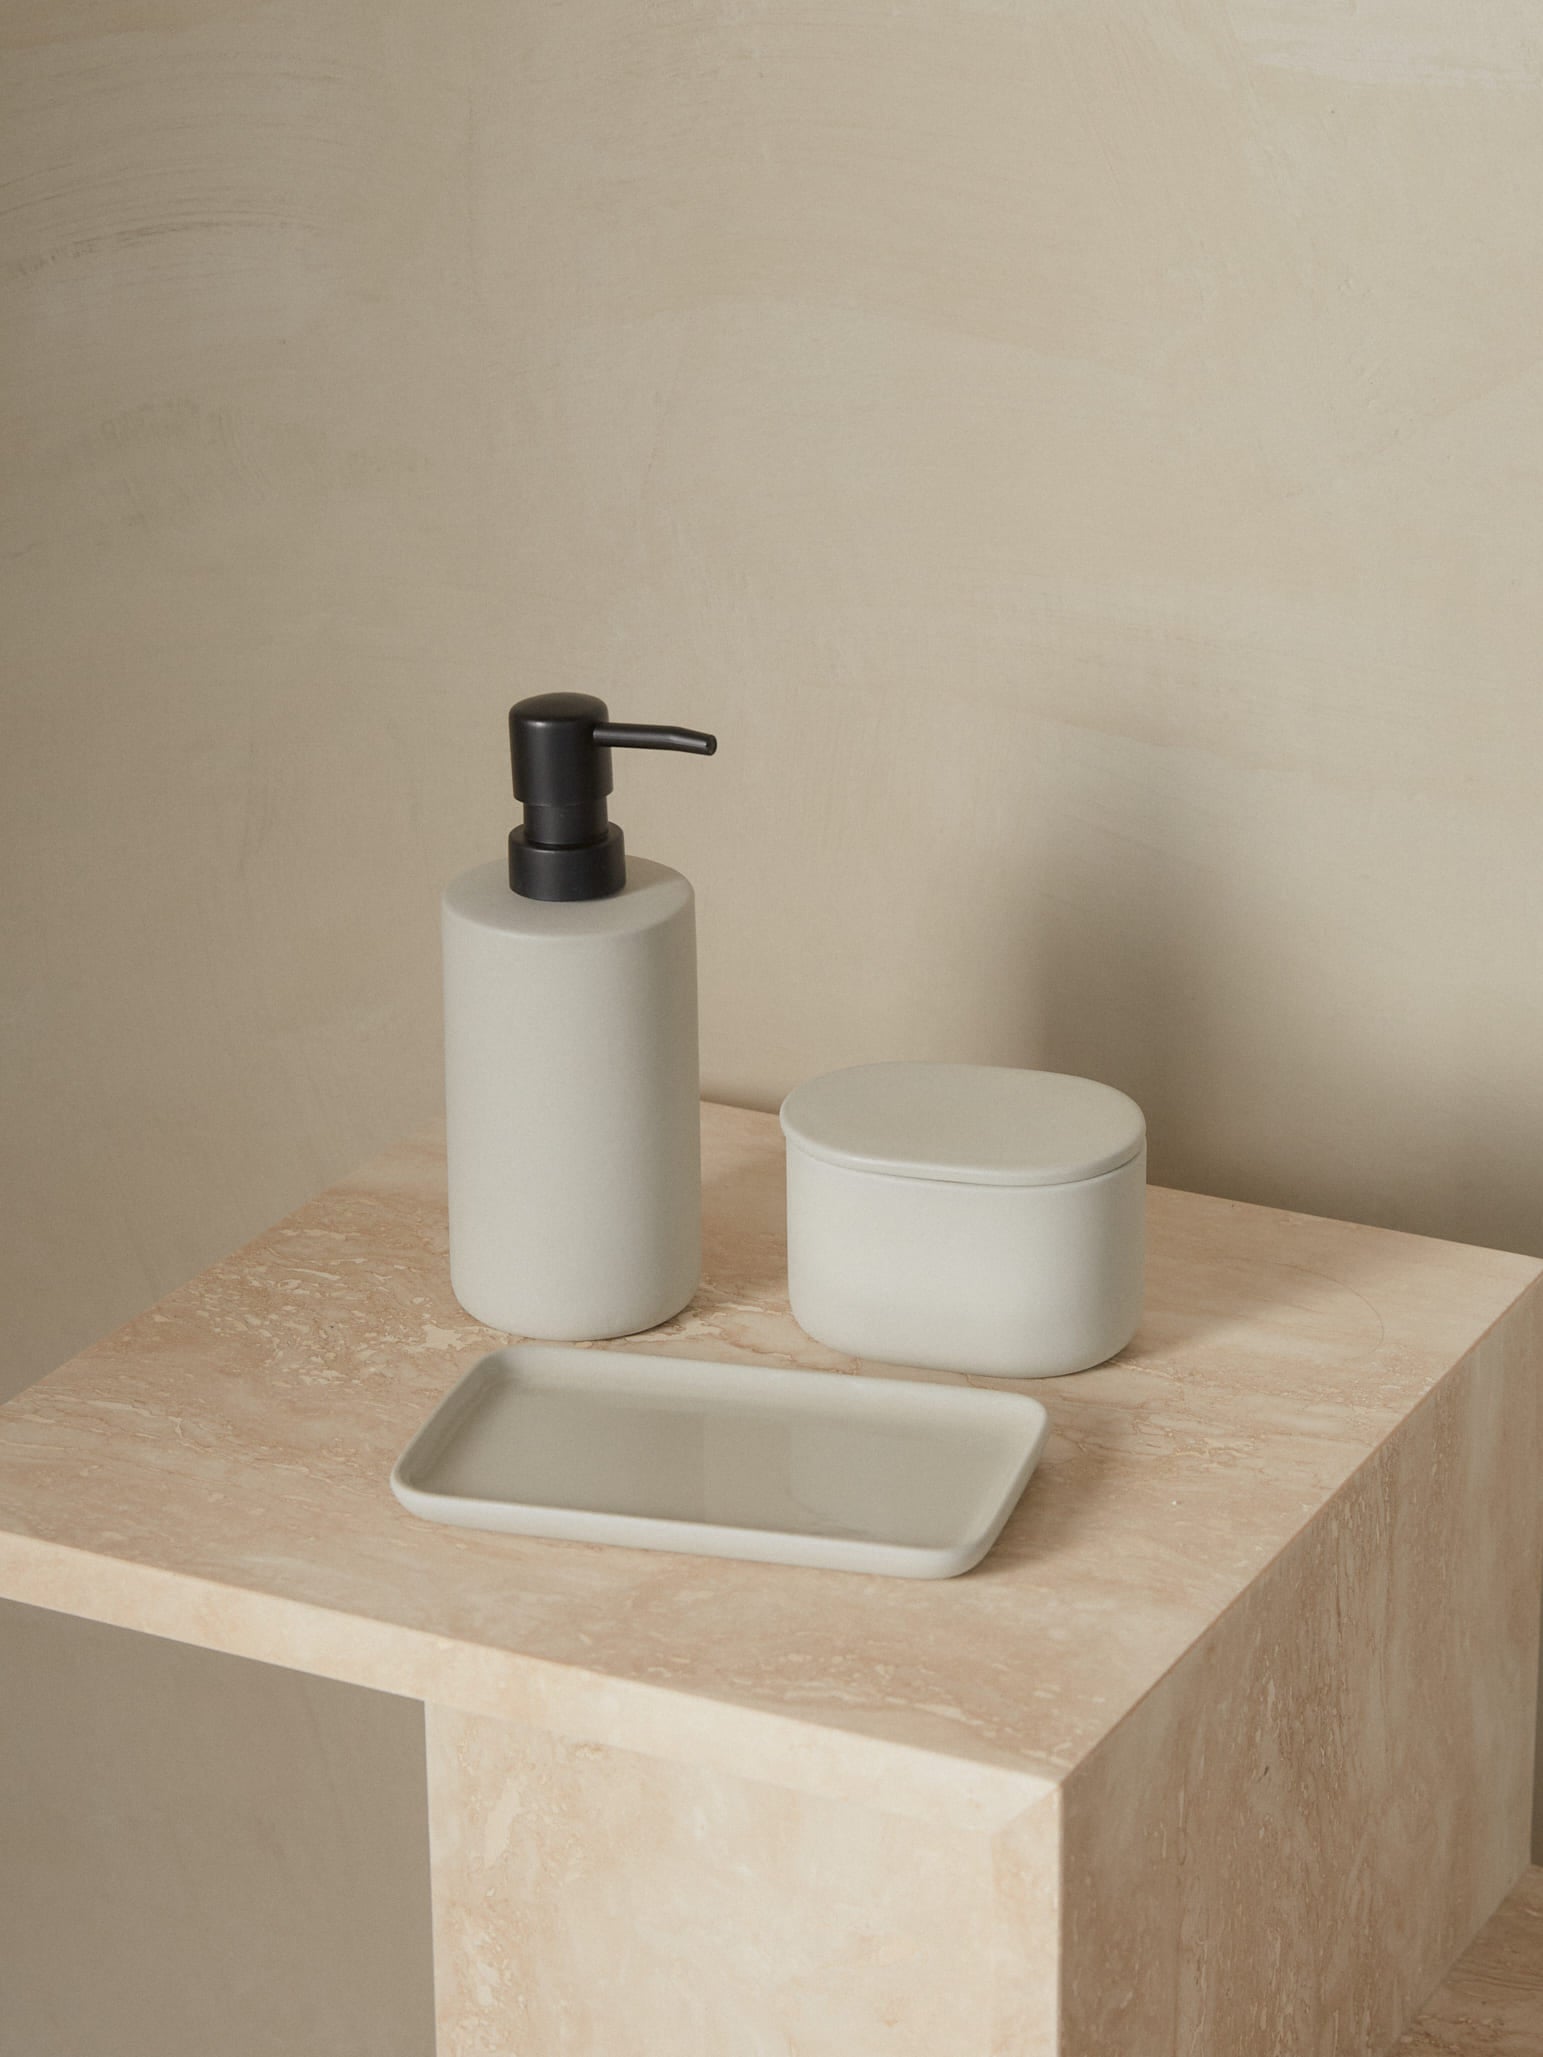 Bertrand Lejoly Cose bath accessories for Serax.Cose Soap Dispenser. A study in refined simplicity, the Cose Soap Dispenser by Bertrand Lejoly for Serax adds subtle luxury to any bathroom or kitchen.